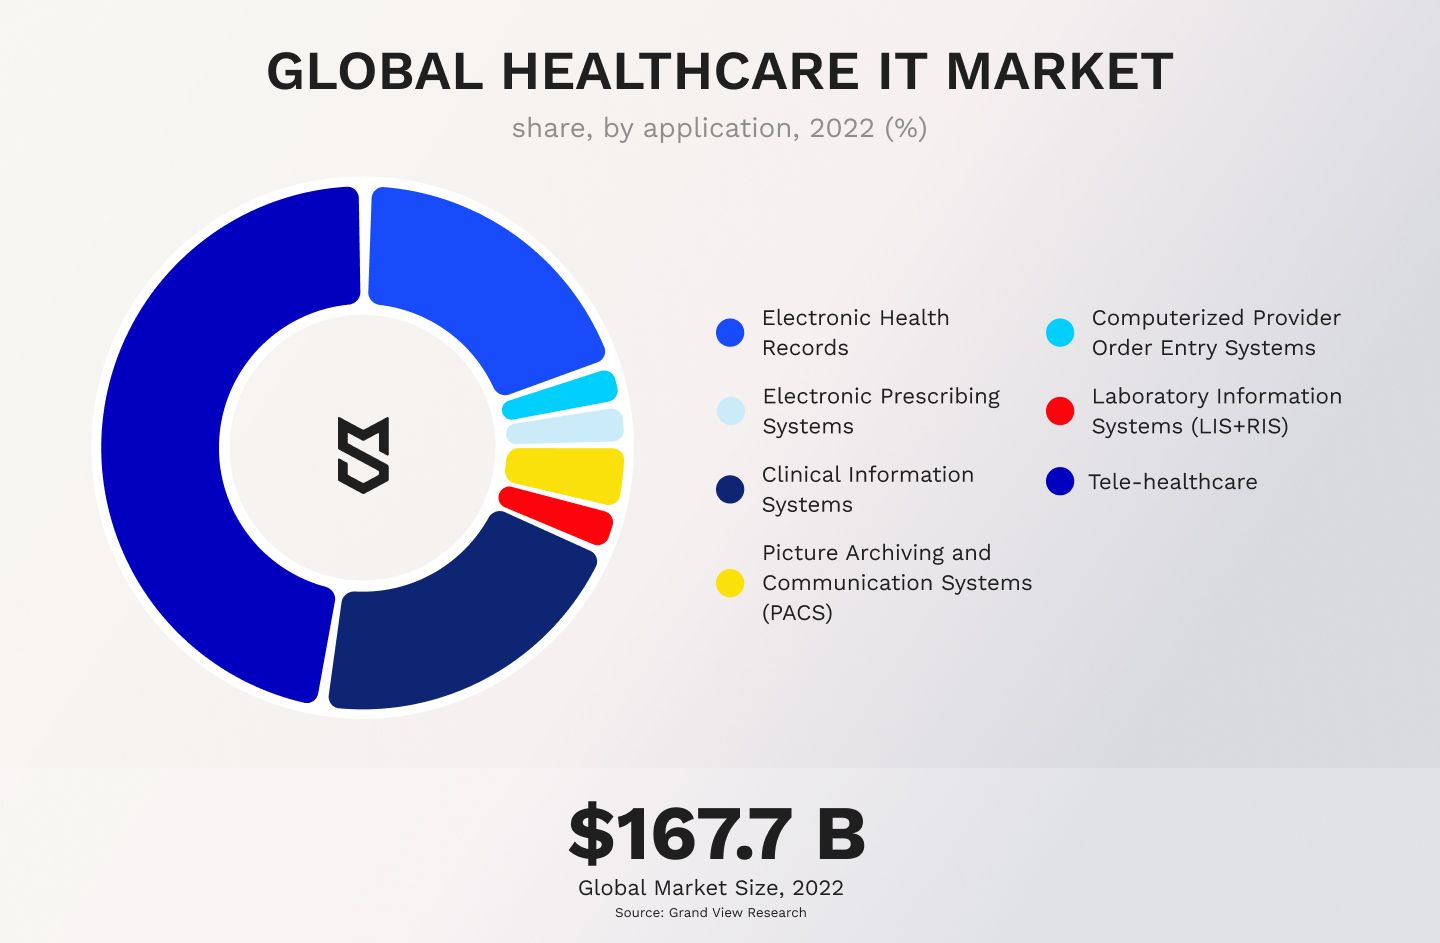 Global healthcare IT market. Share by application